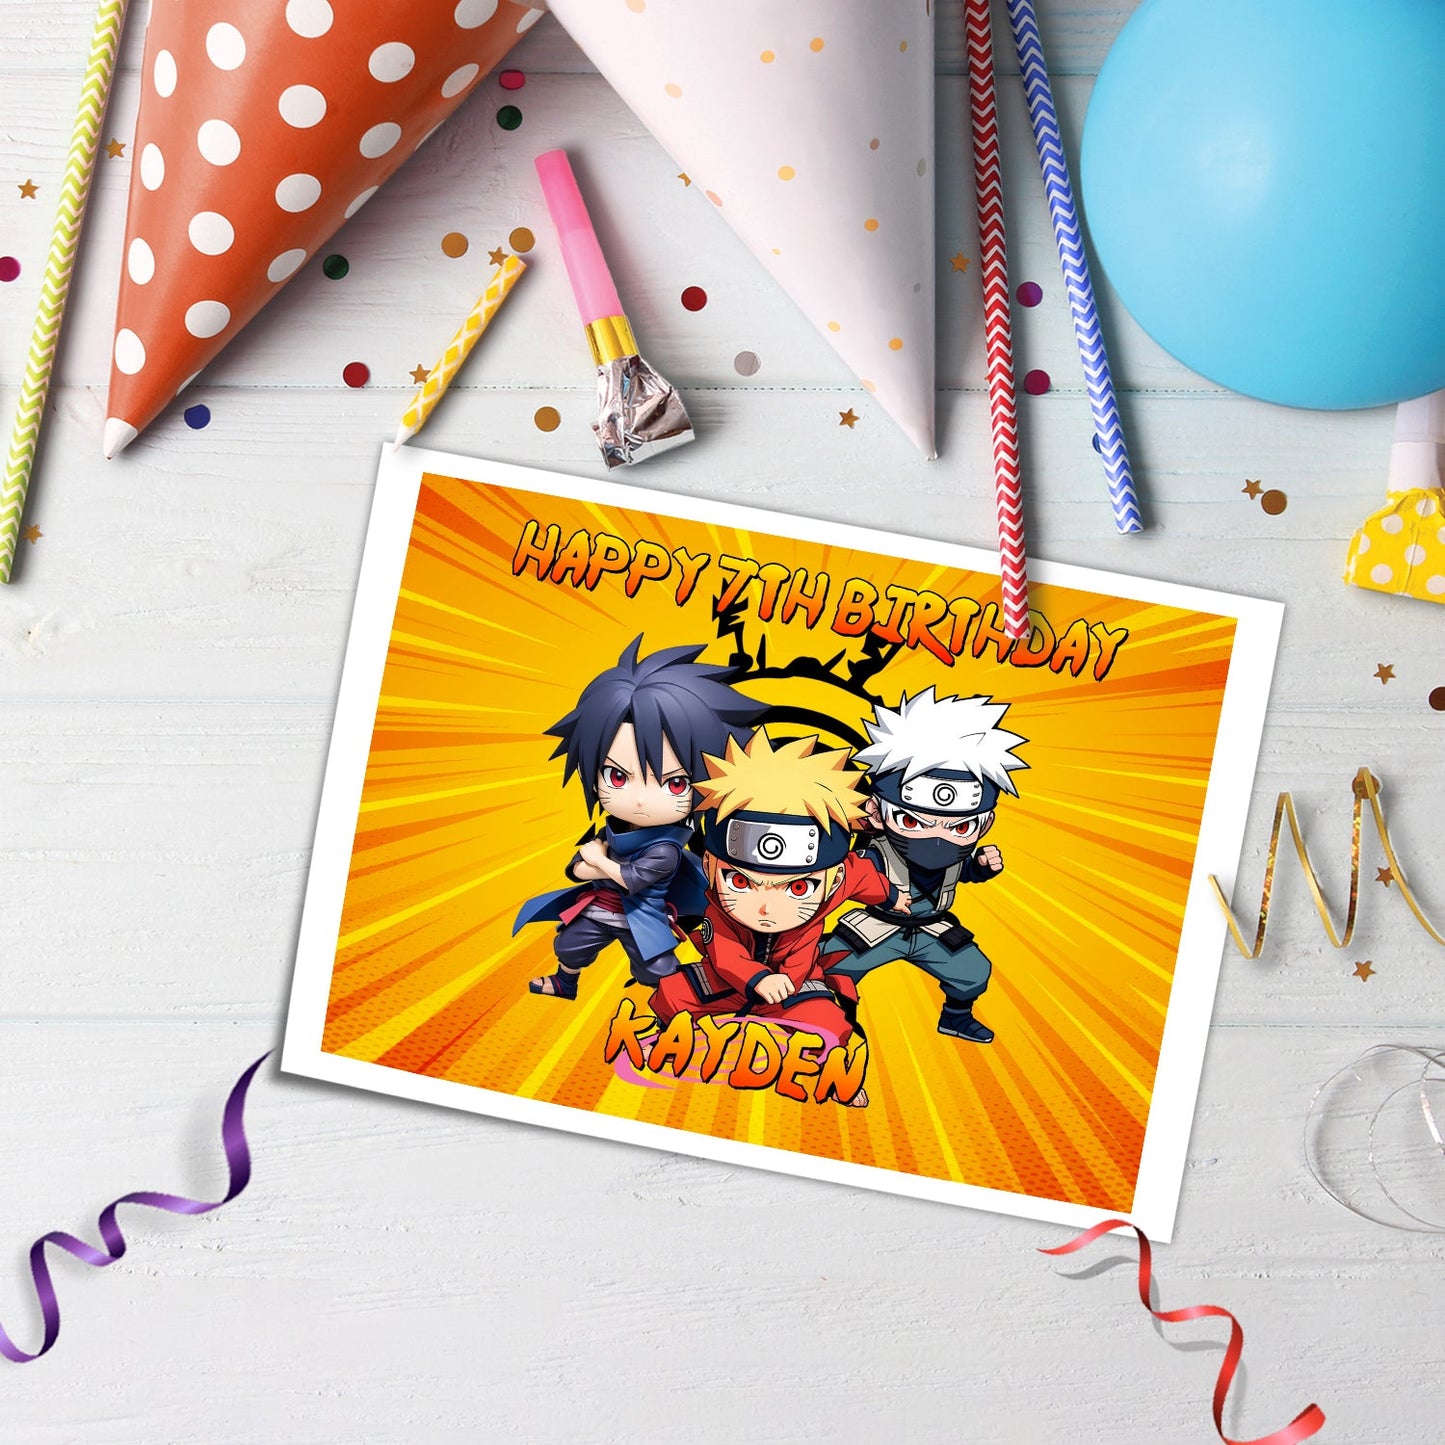 Rectangle Naruto Personalized Edible Sheet Cake Images - Great for Anime Celebrations